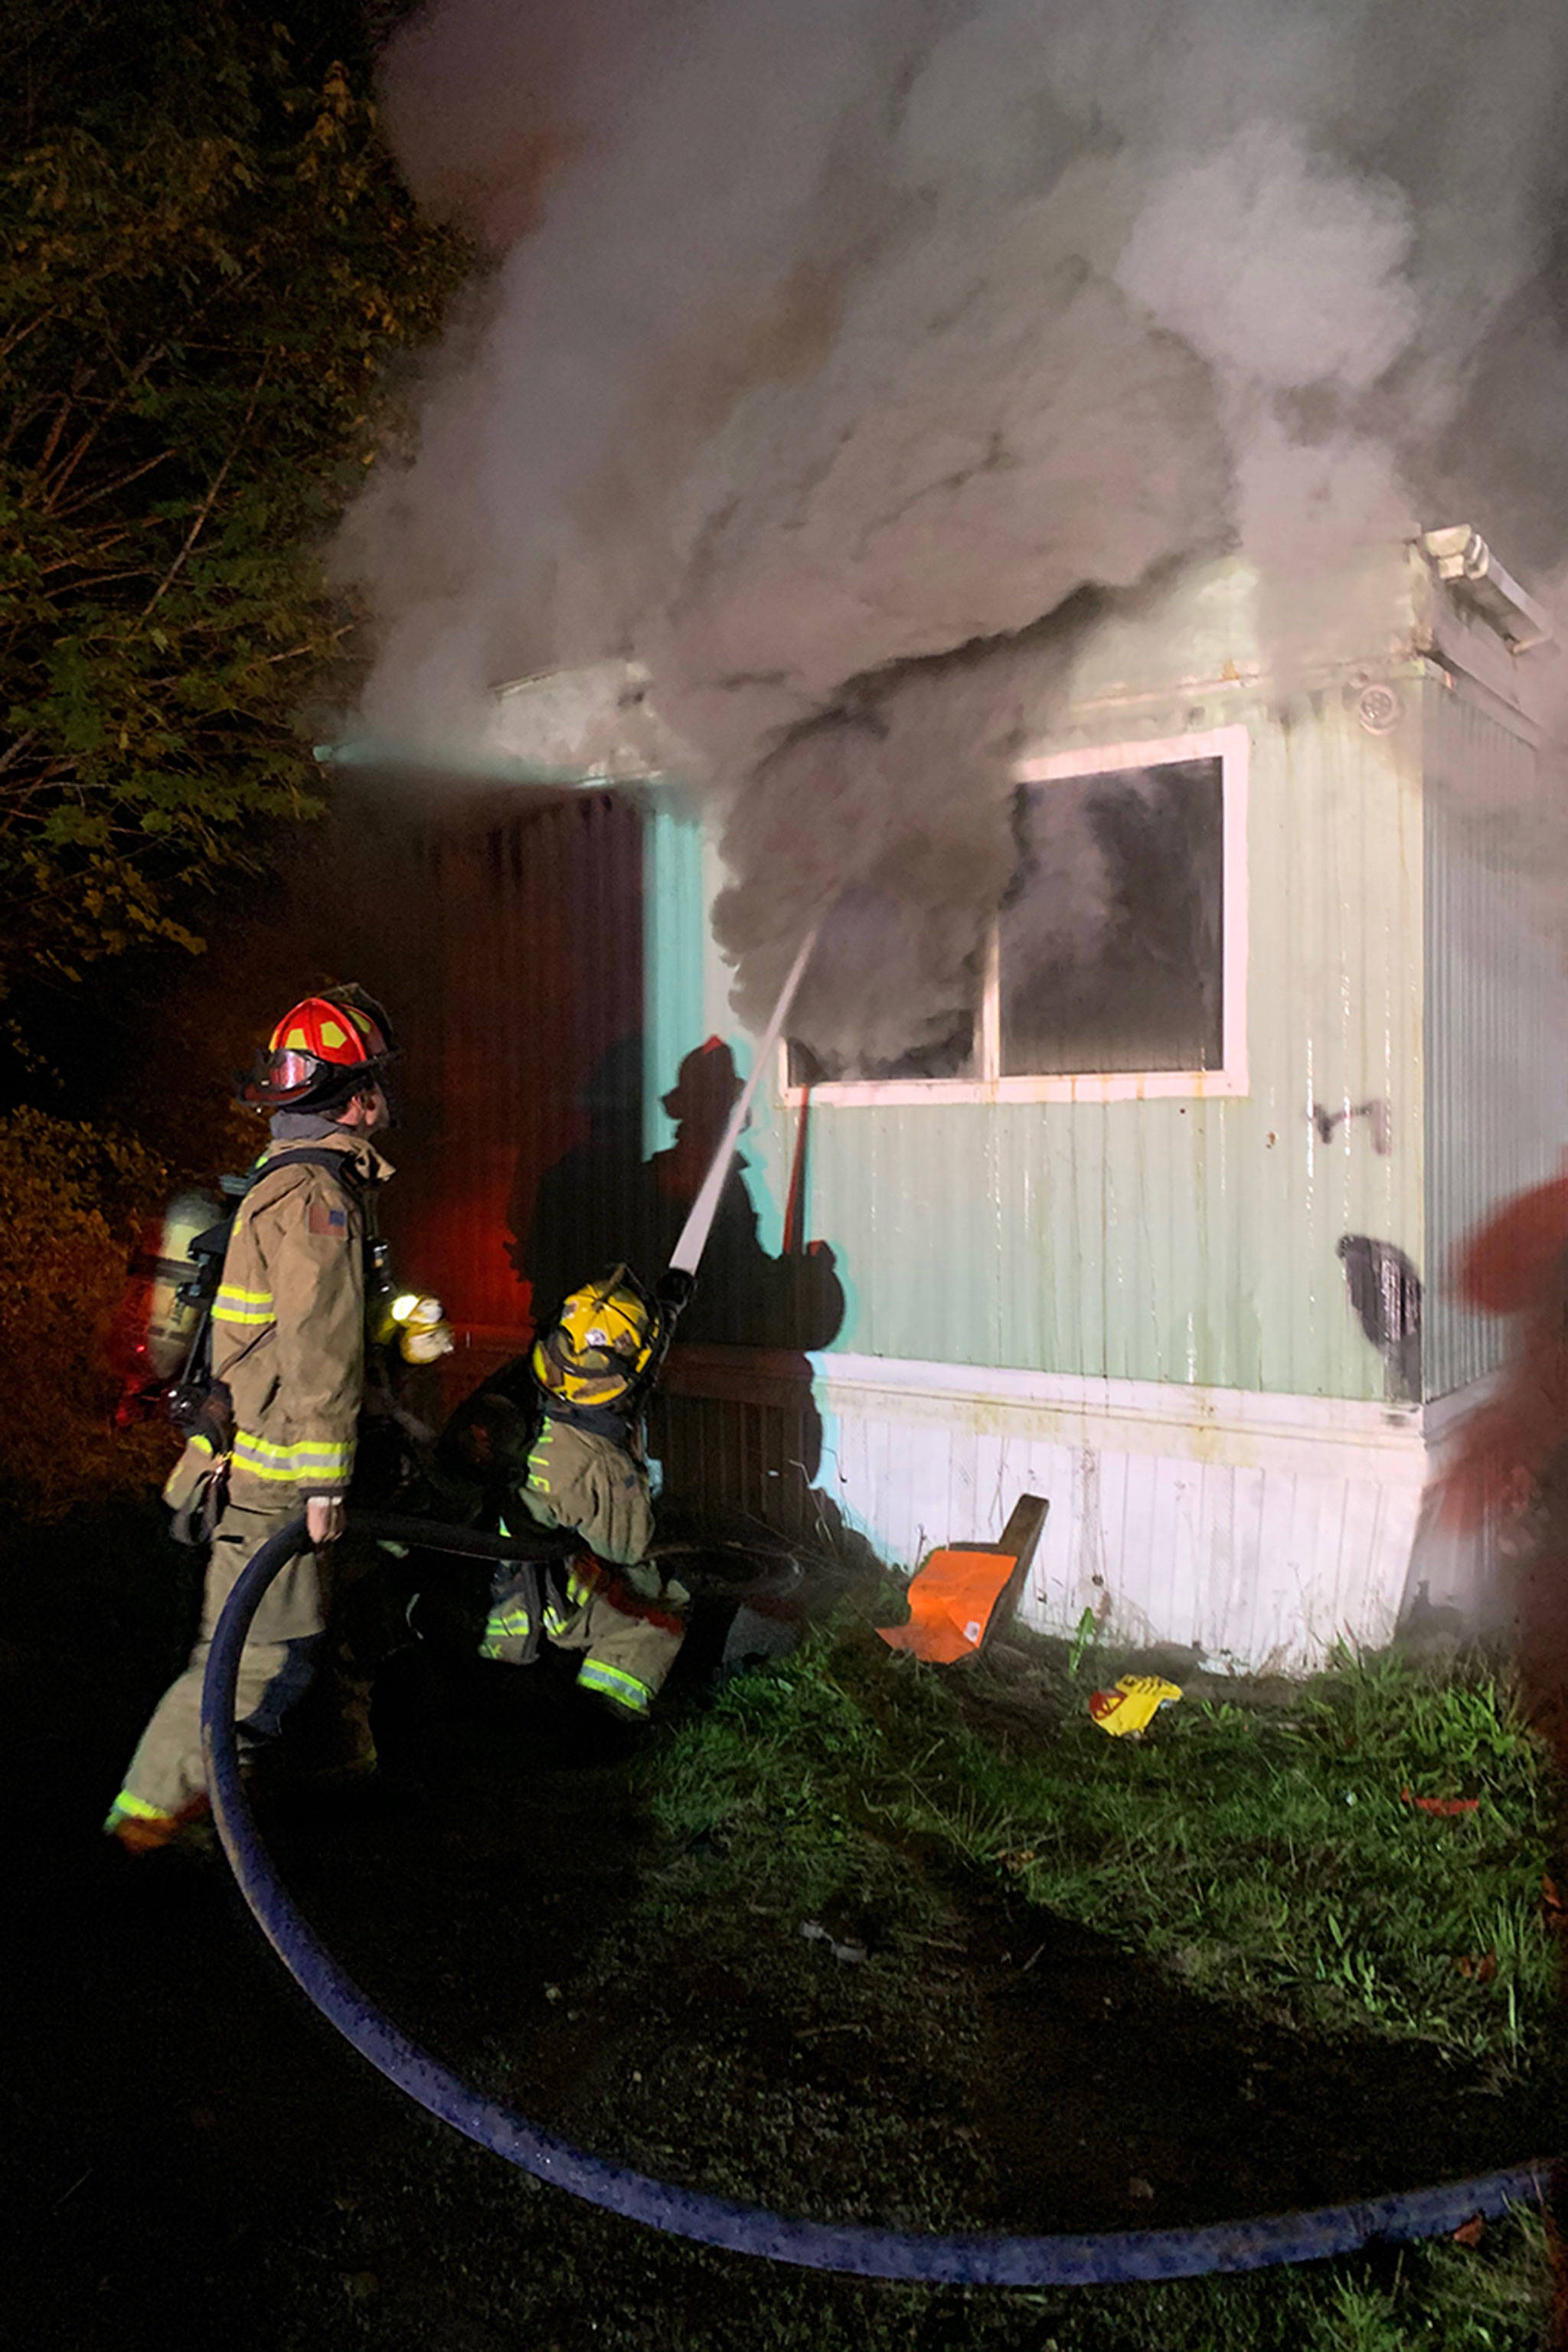 No alarms or escape plan but Marysville family OK after mobile home fire